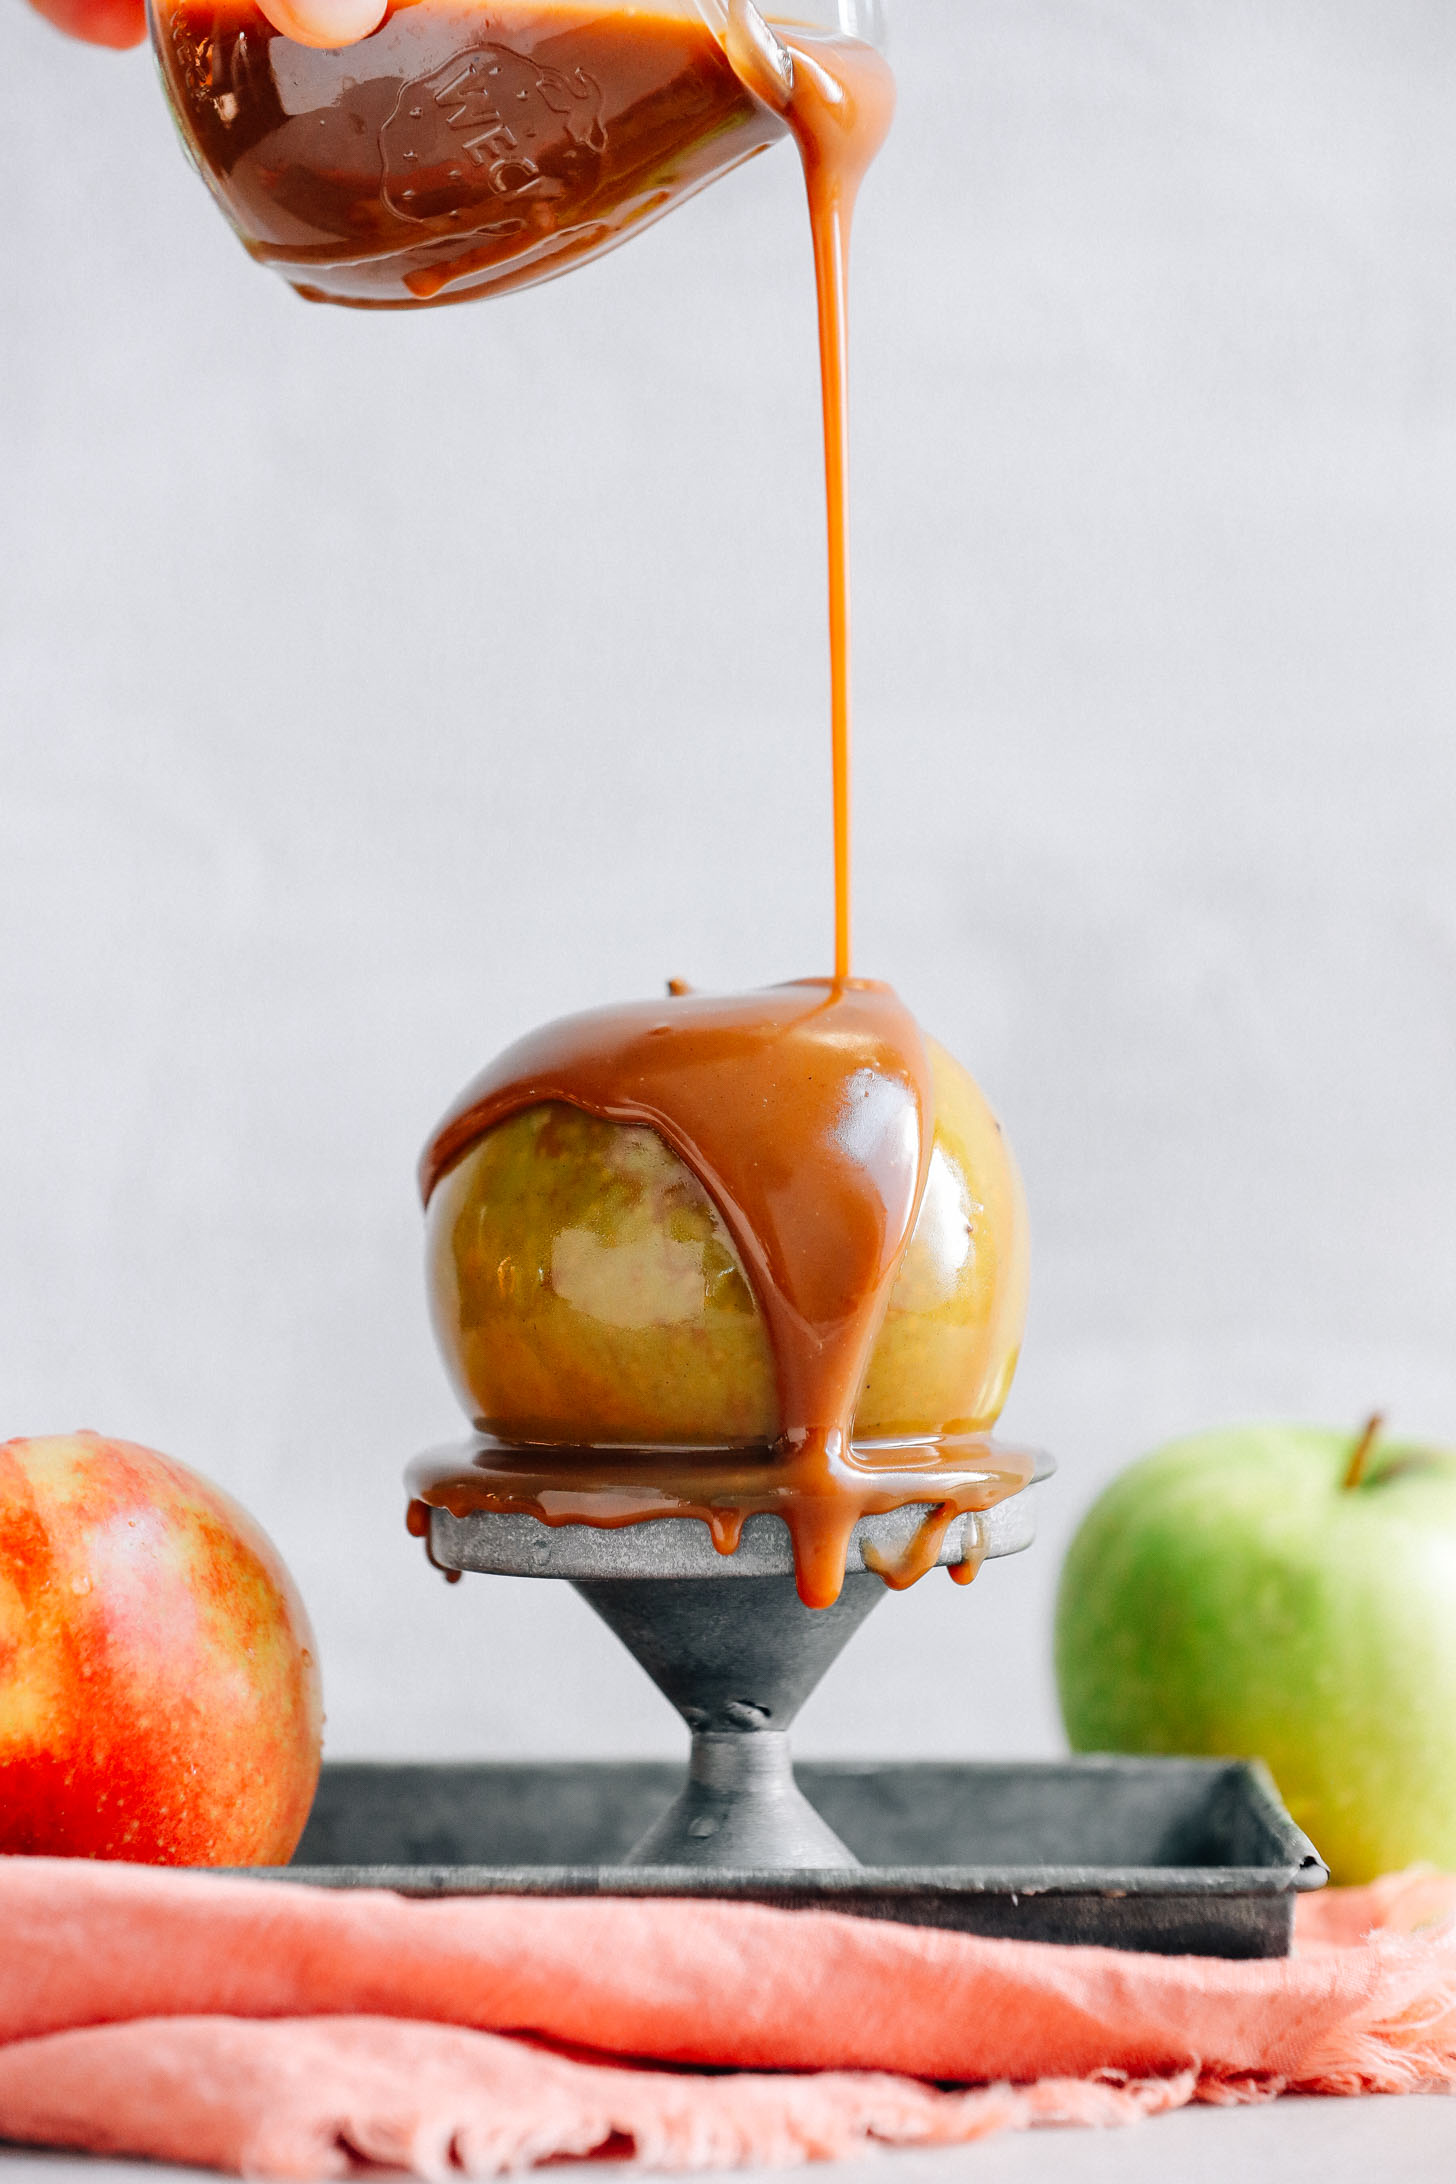 Drizzling our AMAZING Vegan Caramel Sauce onto an apple perched on a metal stand